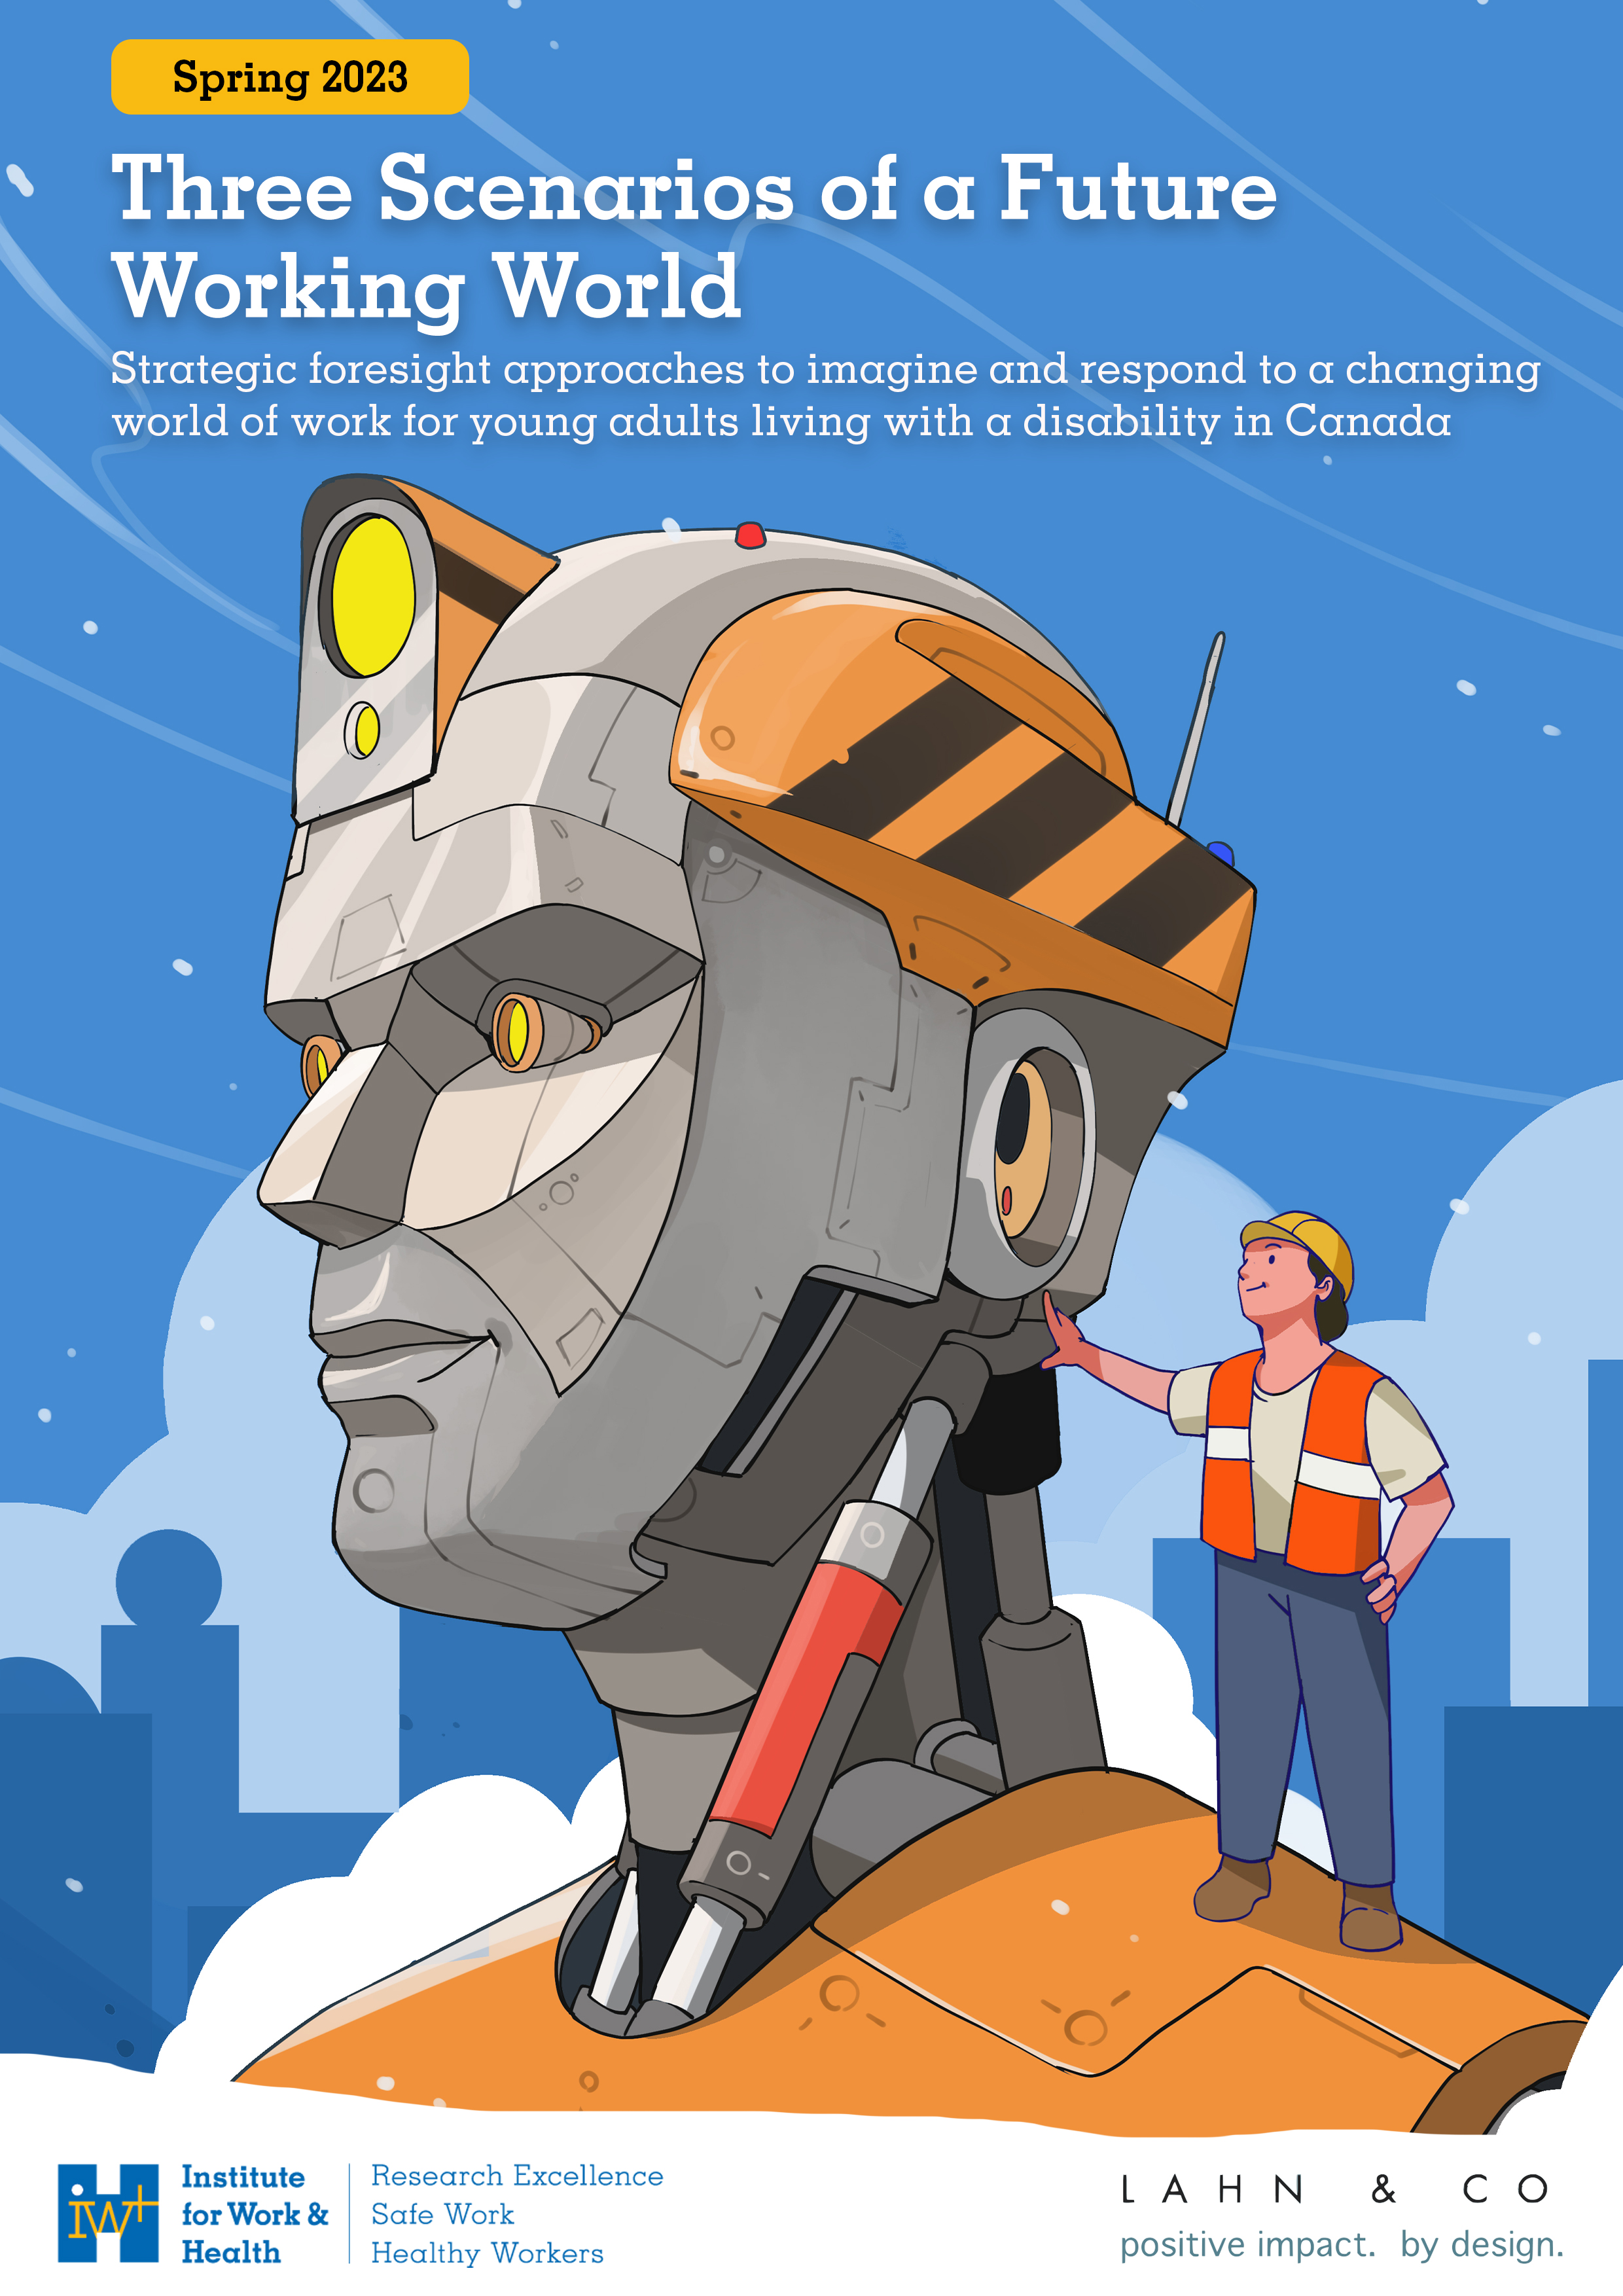 Cover illustration of giant human-like robot with worker standing on its shoulders